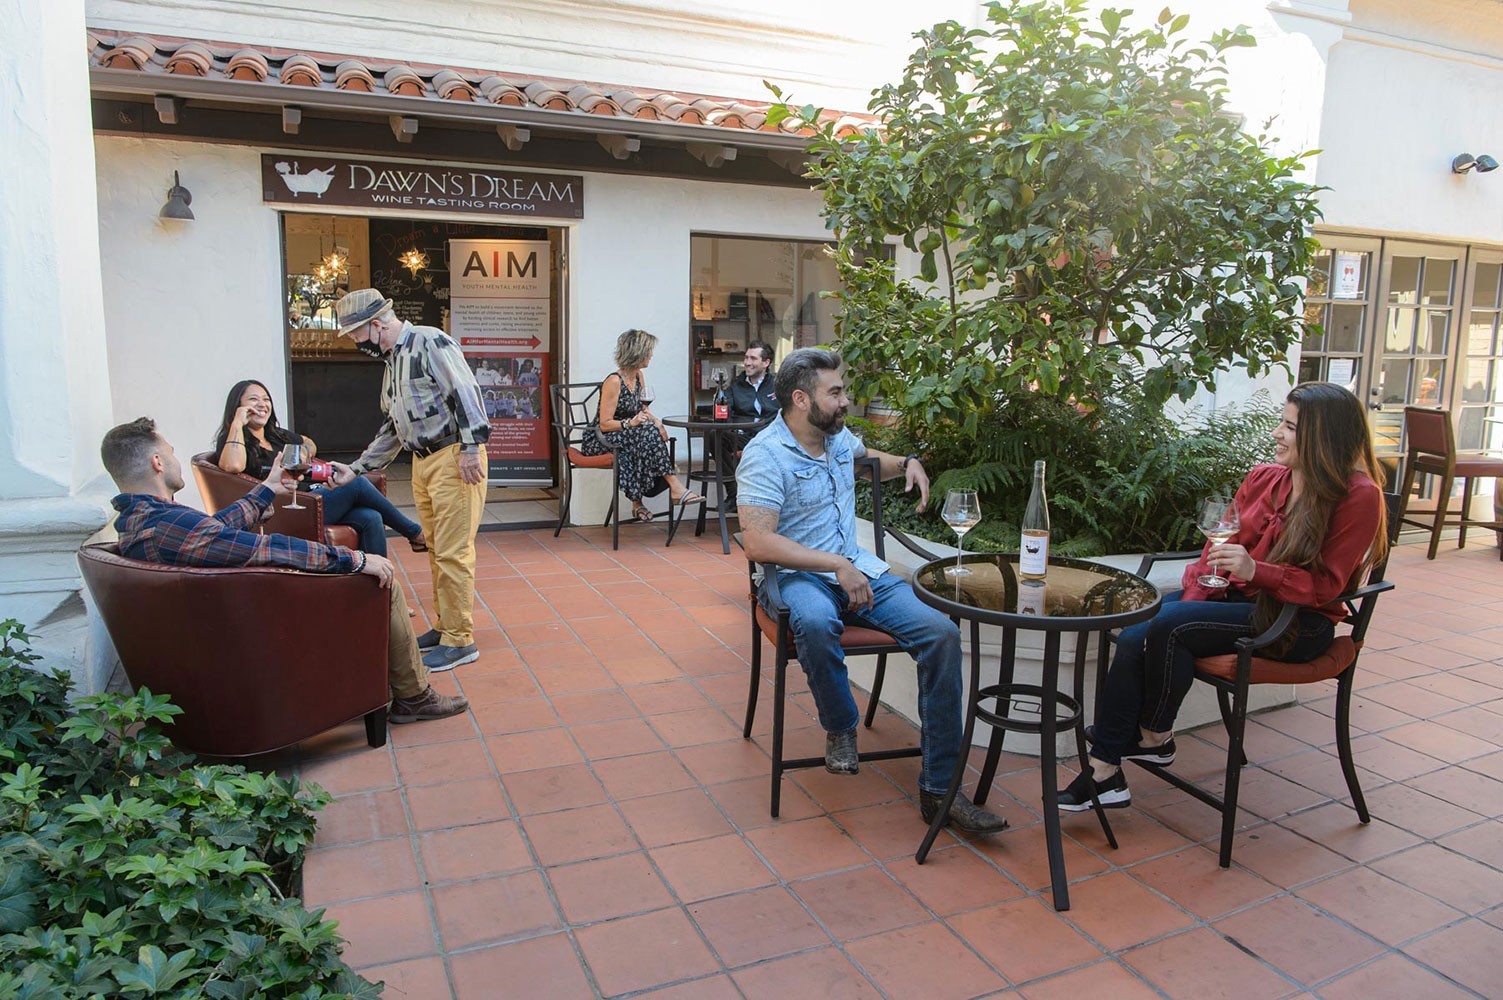 People sitting at tables on a brick patio in front of a white building